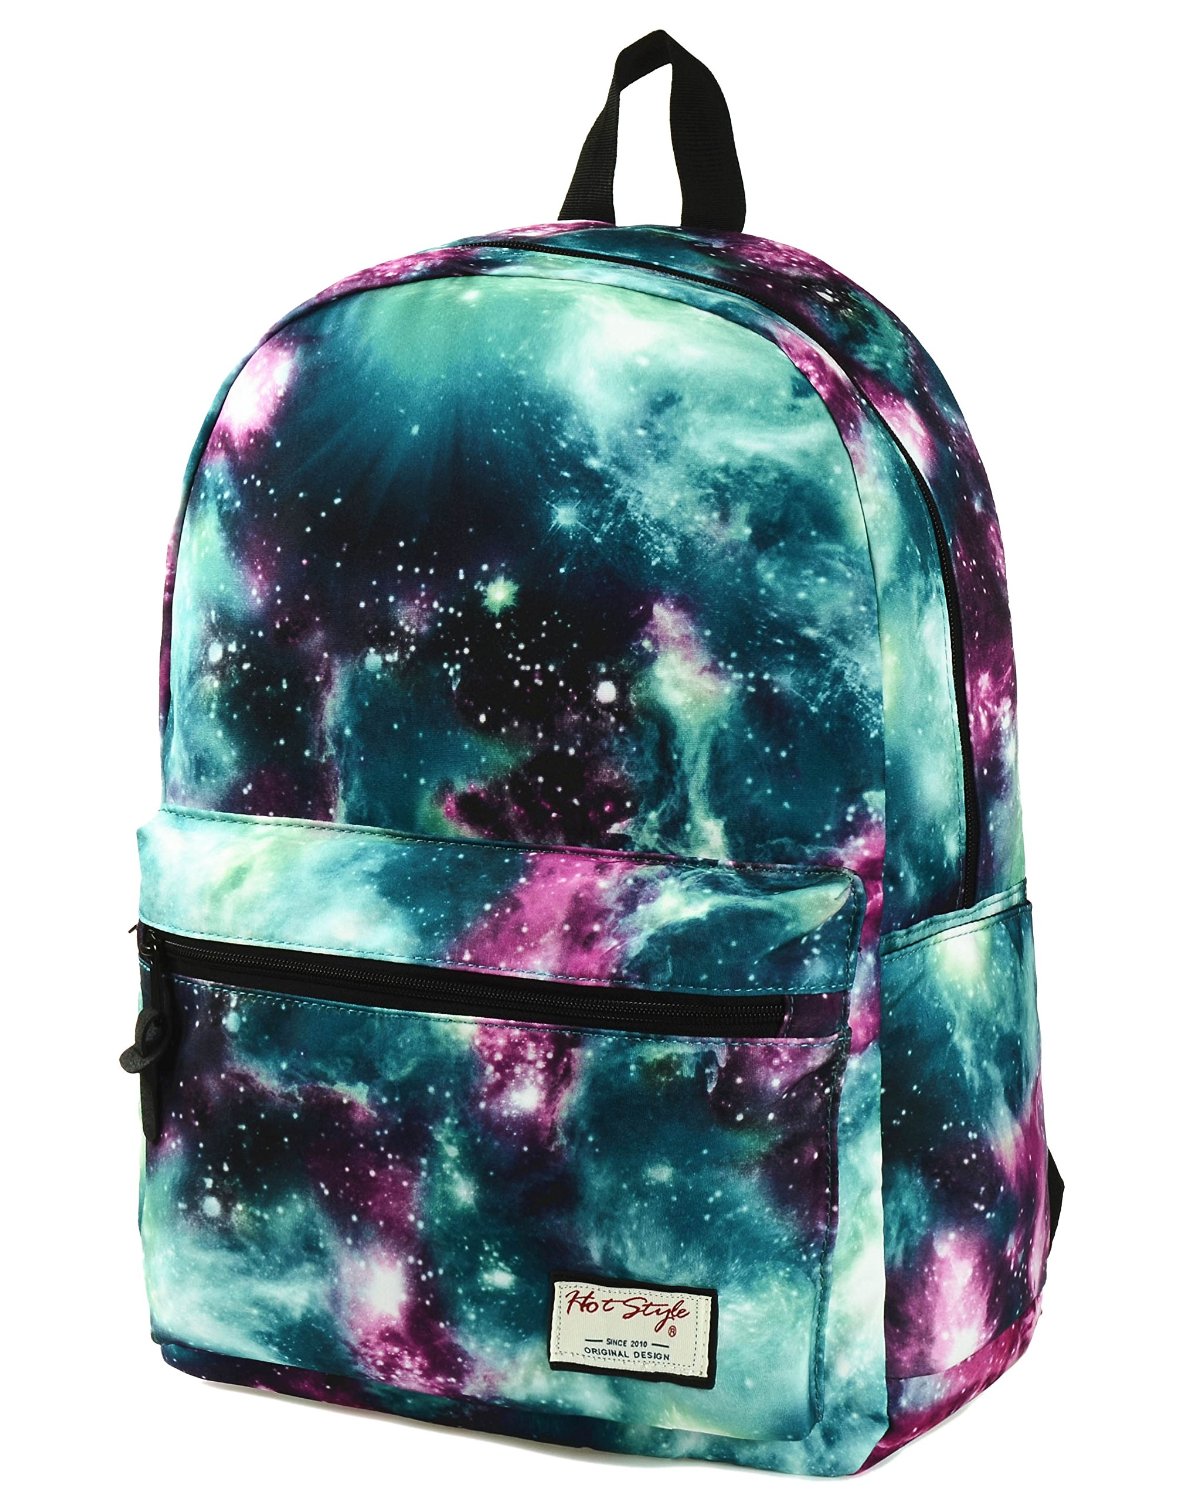 My daughter chose this for 6th grade coming up. Do you like this backpack? | 0